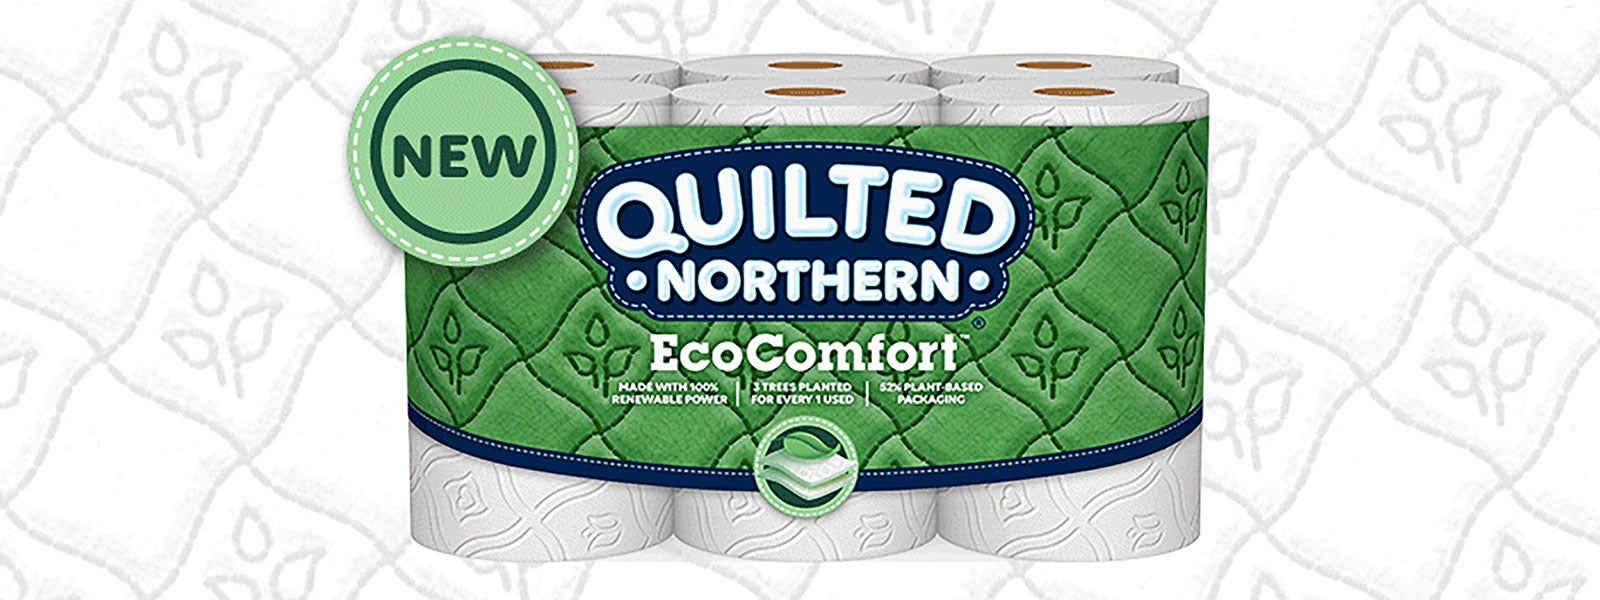 quilted-northern-eco-comfort-1920x600